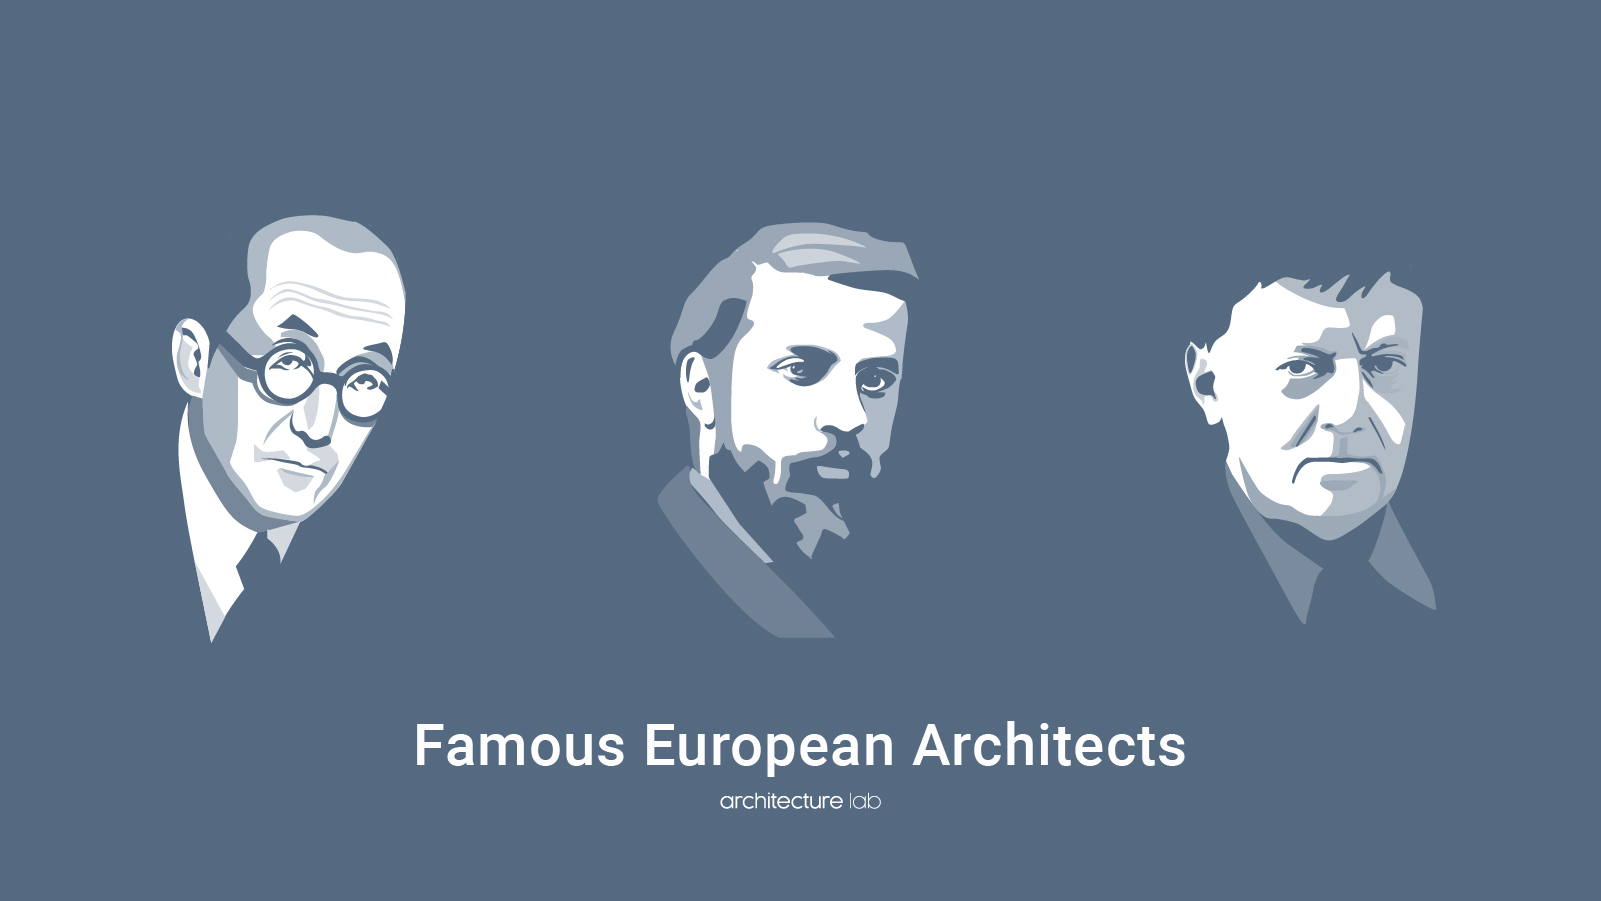 15 famous european architects and their proud works